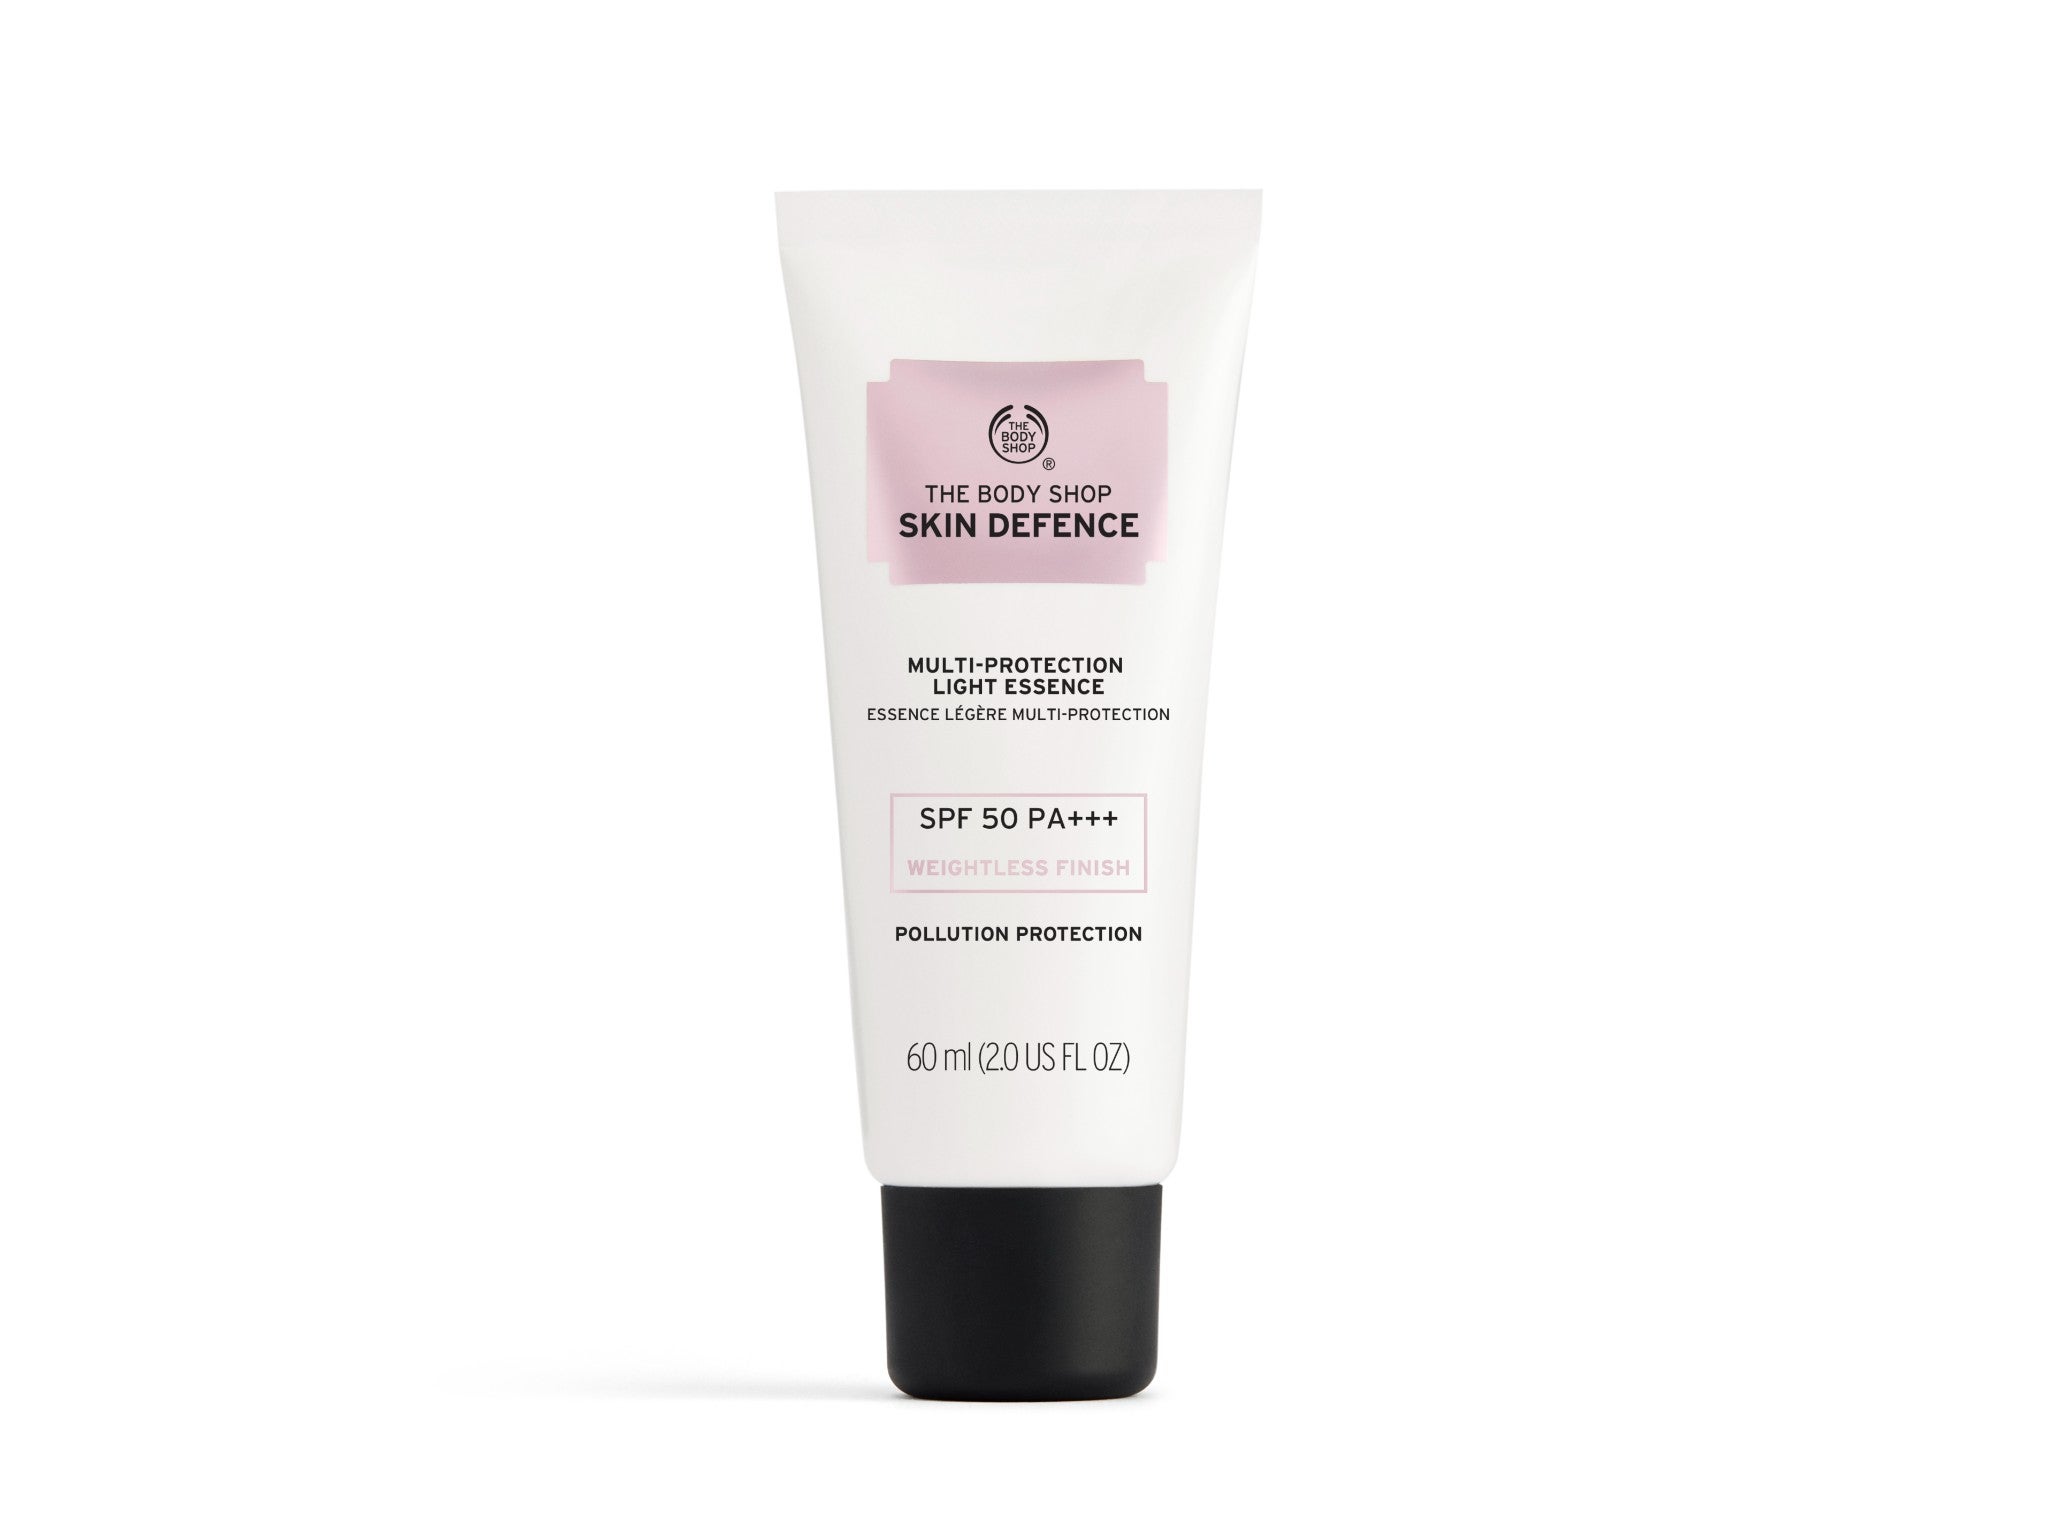 The Body Shop skin defence multi-protection lotion SPF50  indybest